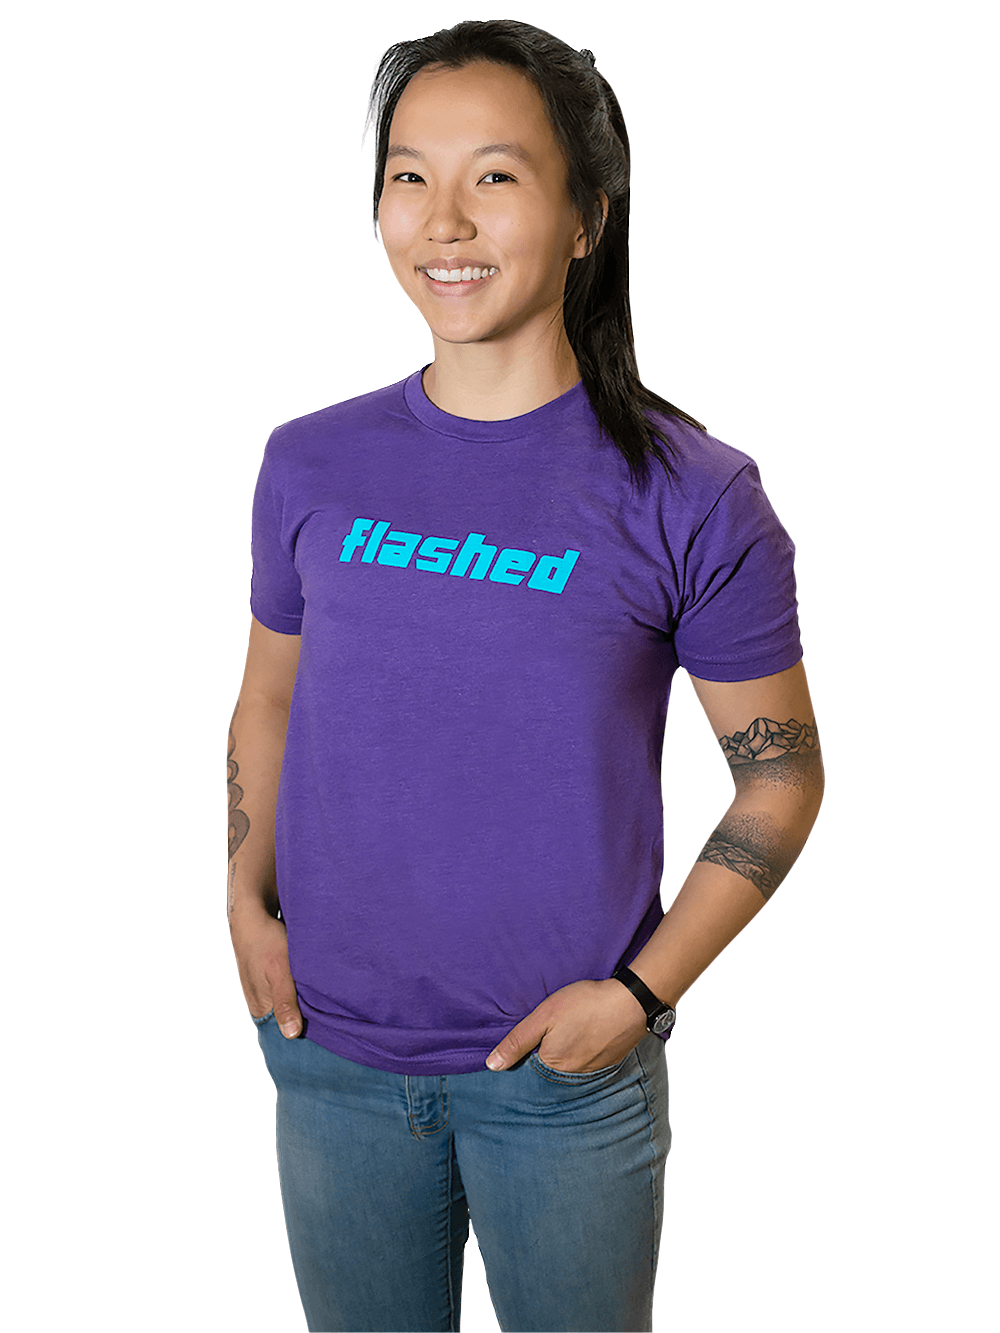 https://www.flashed.com/wp-content/uploads/2022/01/Flashed-T-shirt-Womens-Front-New.png